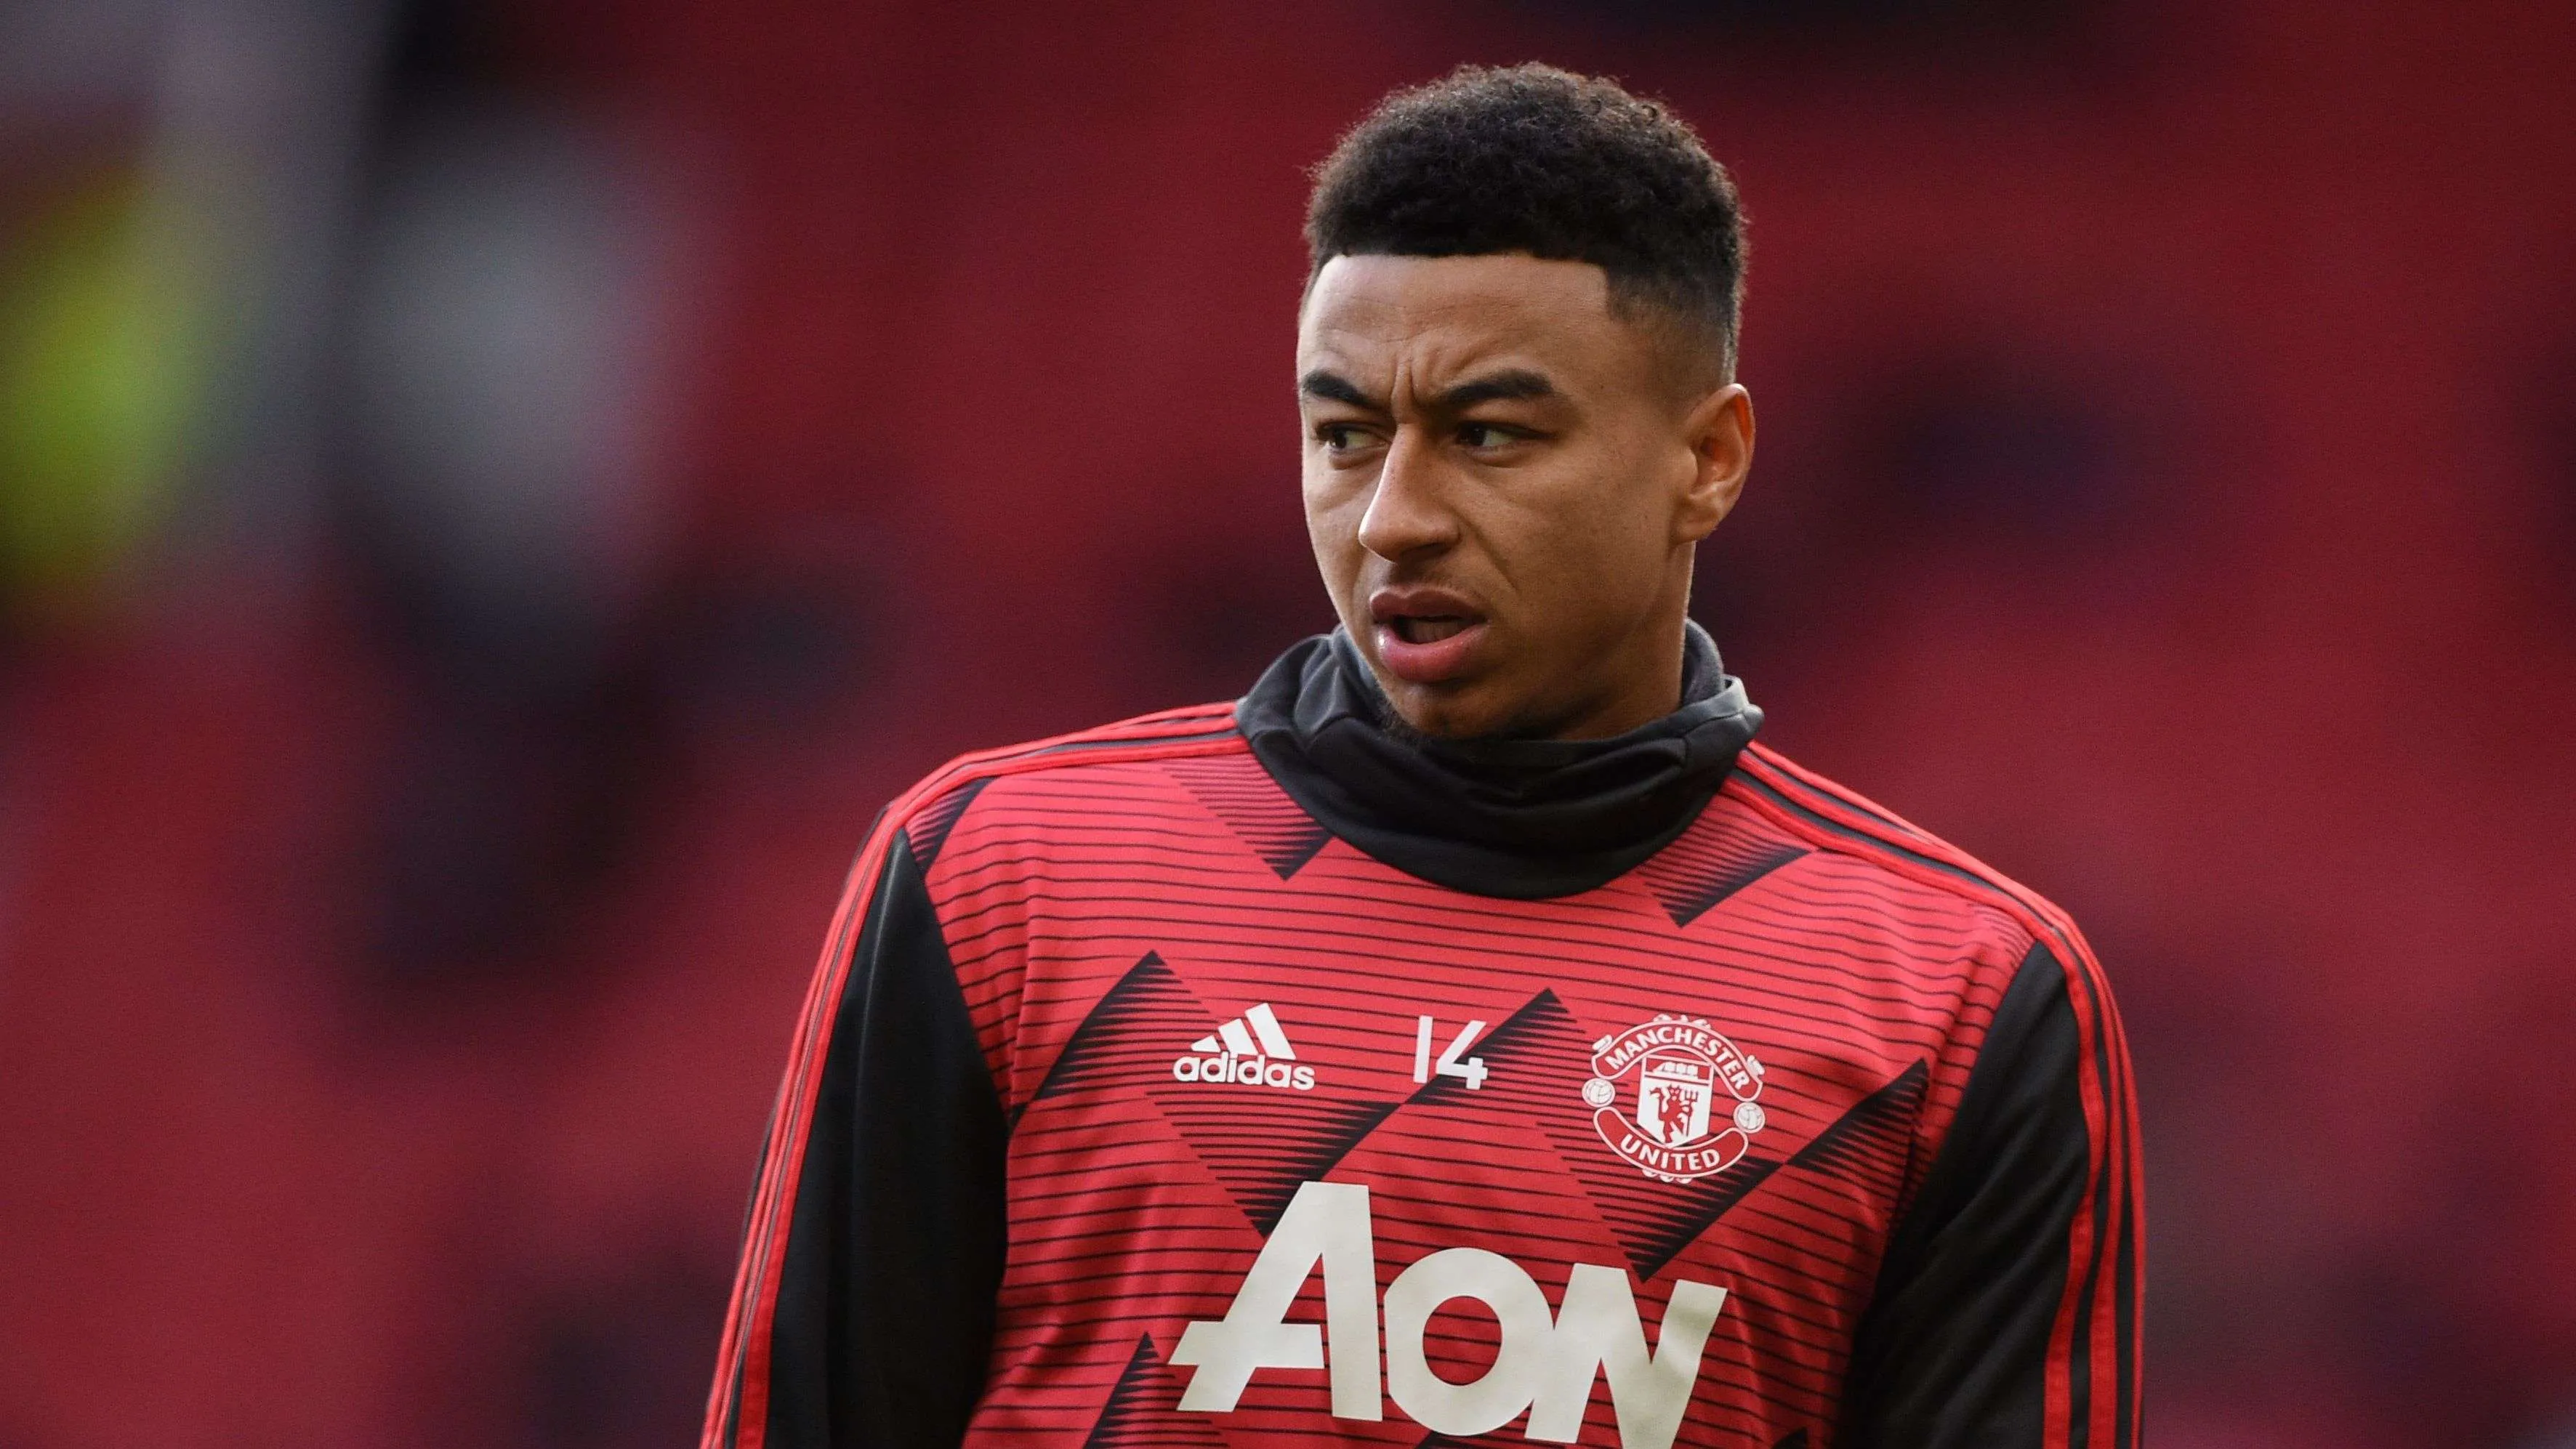 Man utd ready to sell pogba and lingard to raise funds for sancho - Bóng Đá